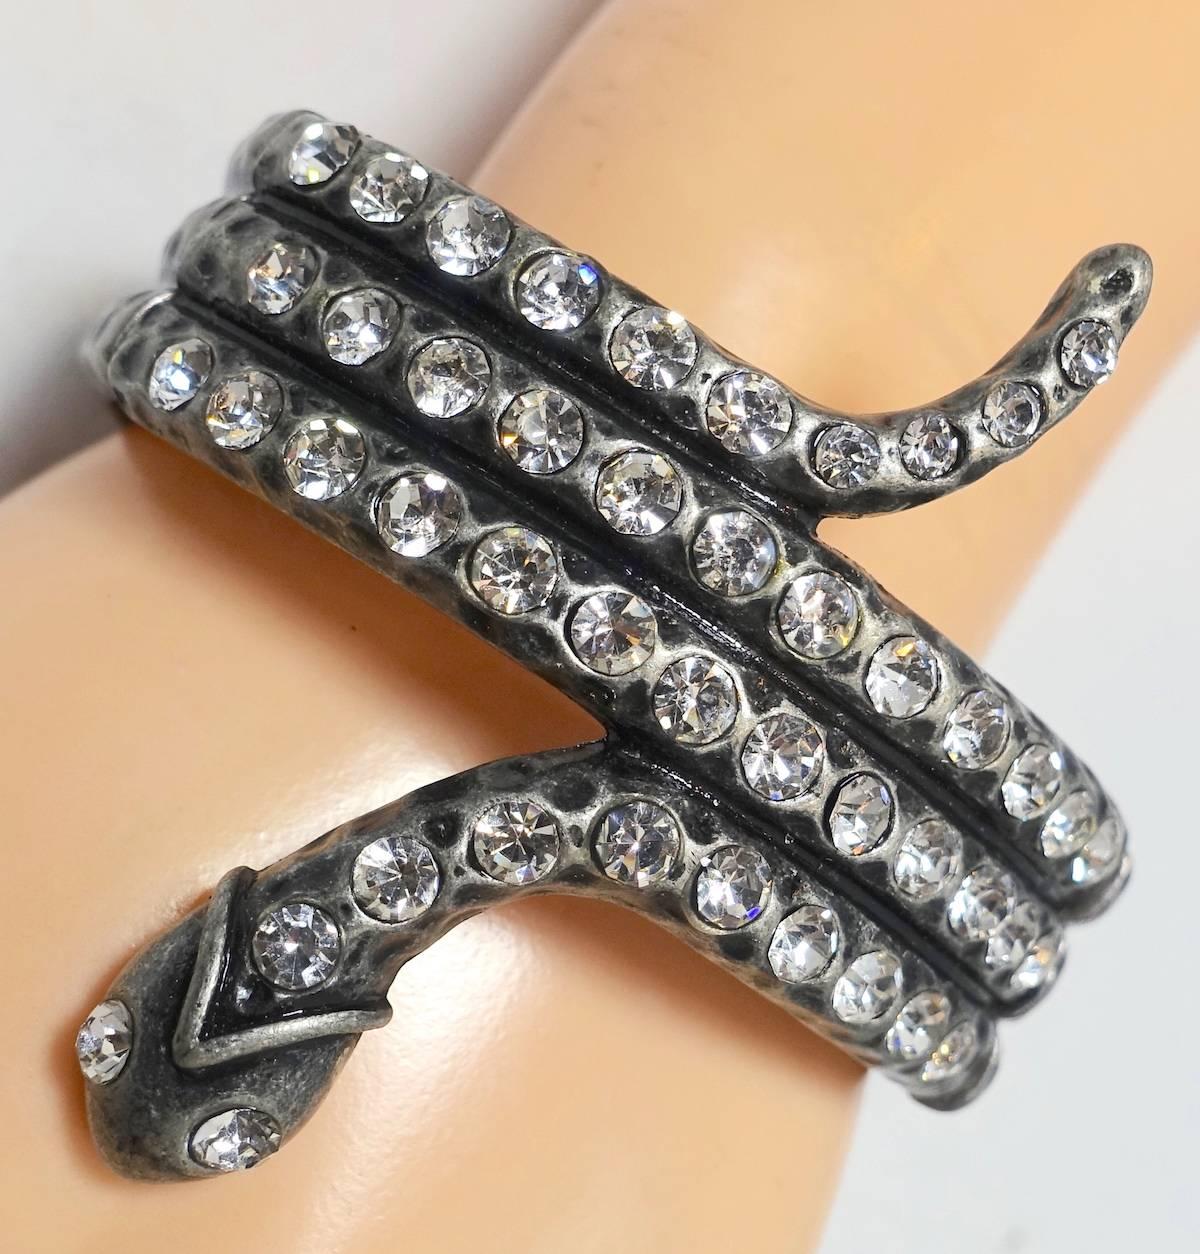 I was lucky to find two of these … one for each wrist for those who want to make a fashion statement. This dramatic stretch bracelet features a snake-serpent design with clear crystals in a heavily carved silver tone setting.  In excellent